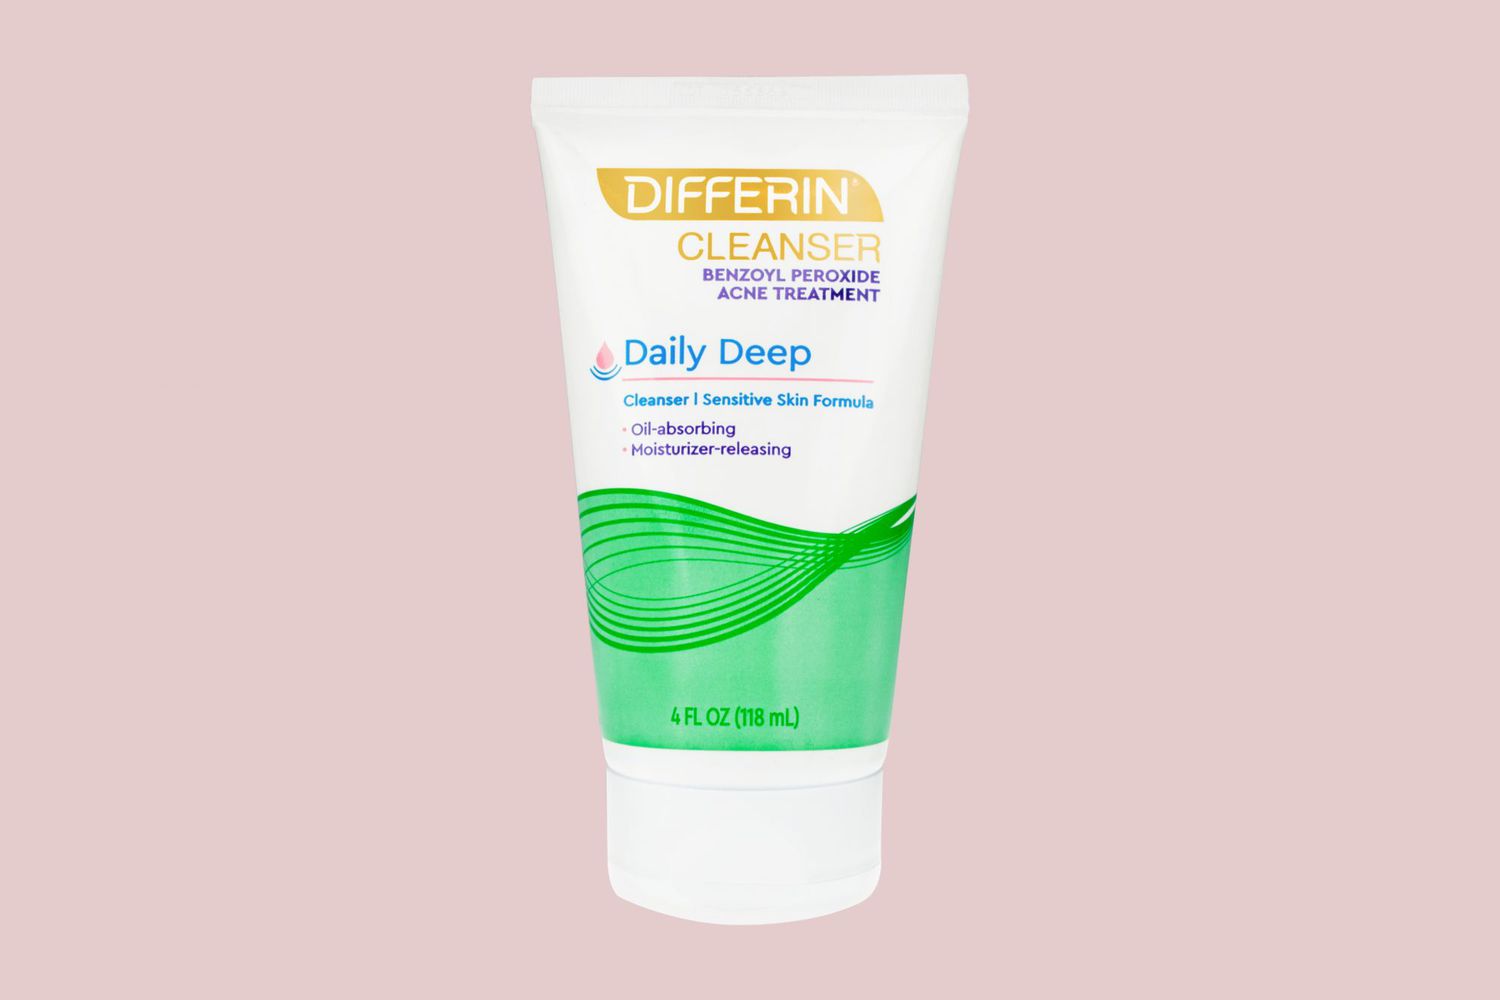 differin acne treatment cleanser